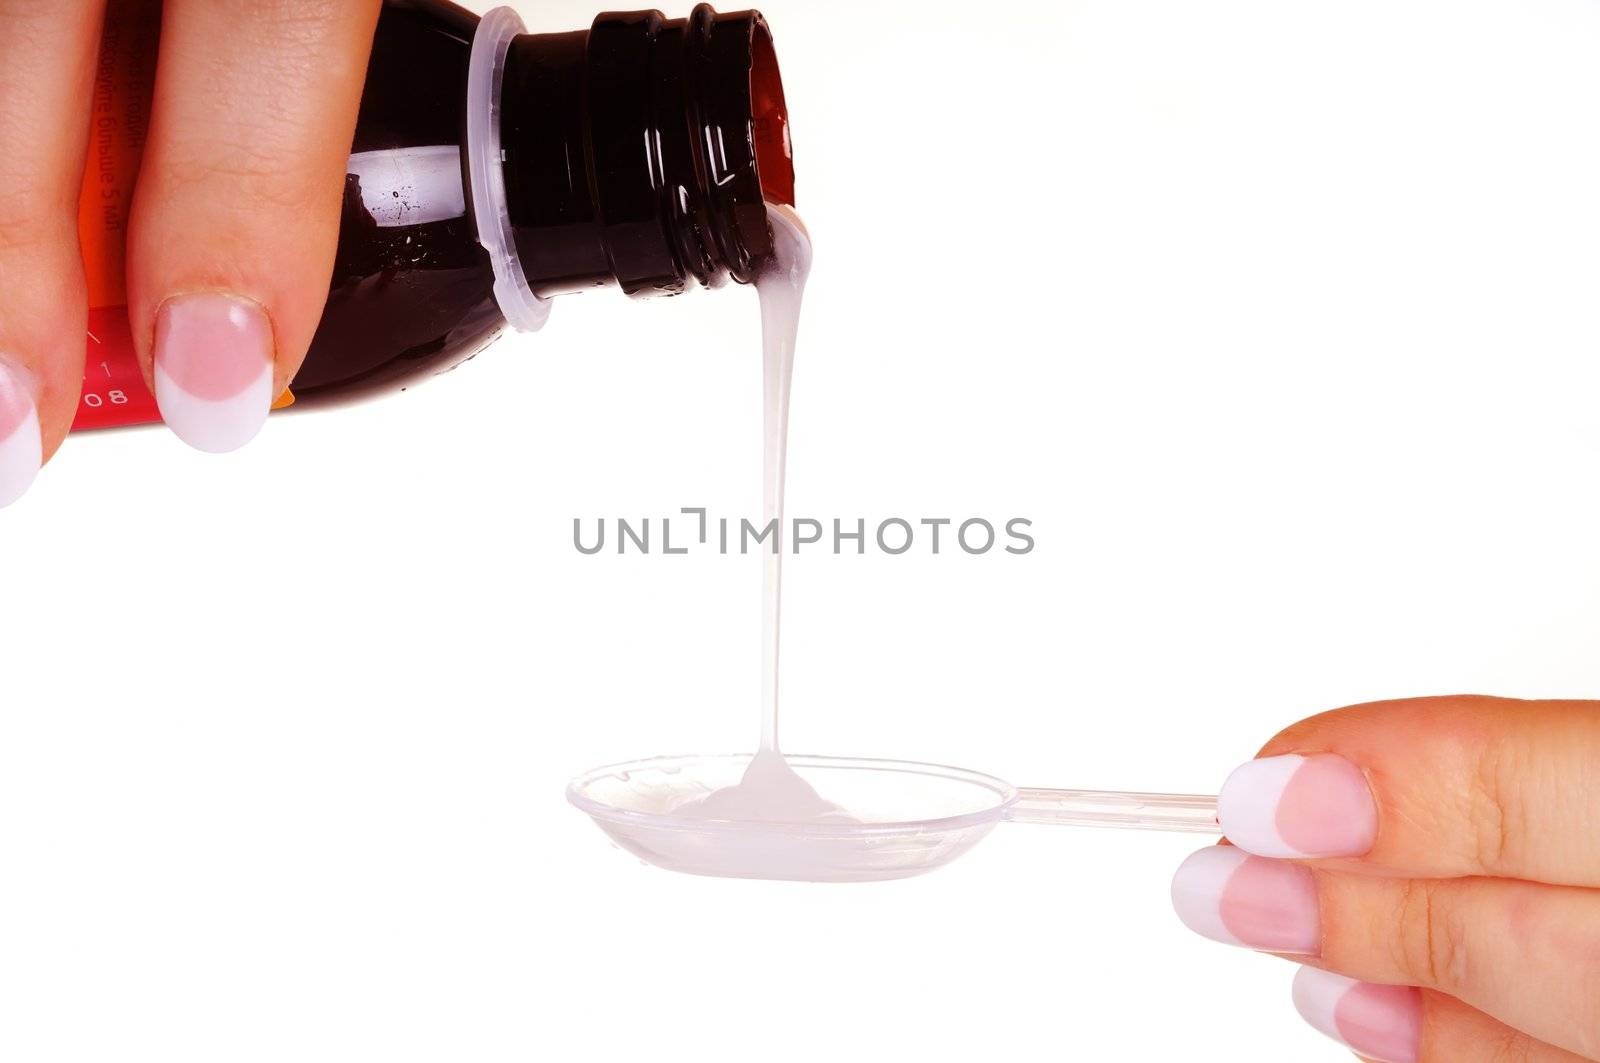 Liquid medicine pouring by female hands from bottle to measuring spoon. On white background.